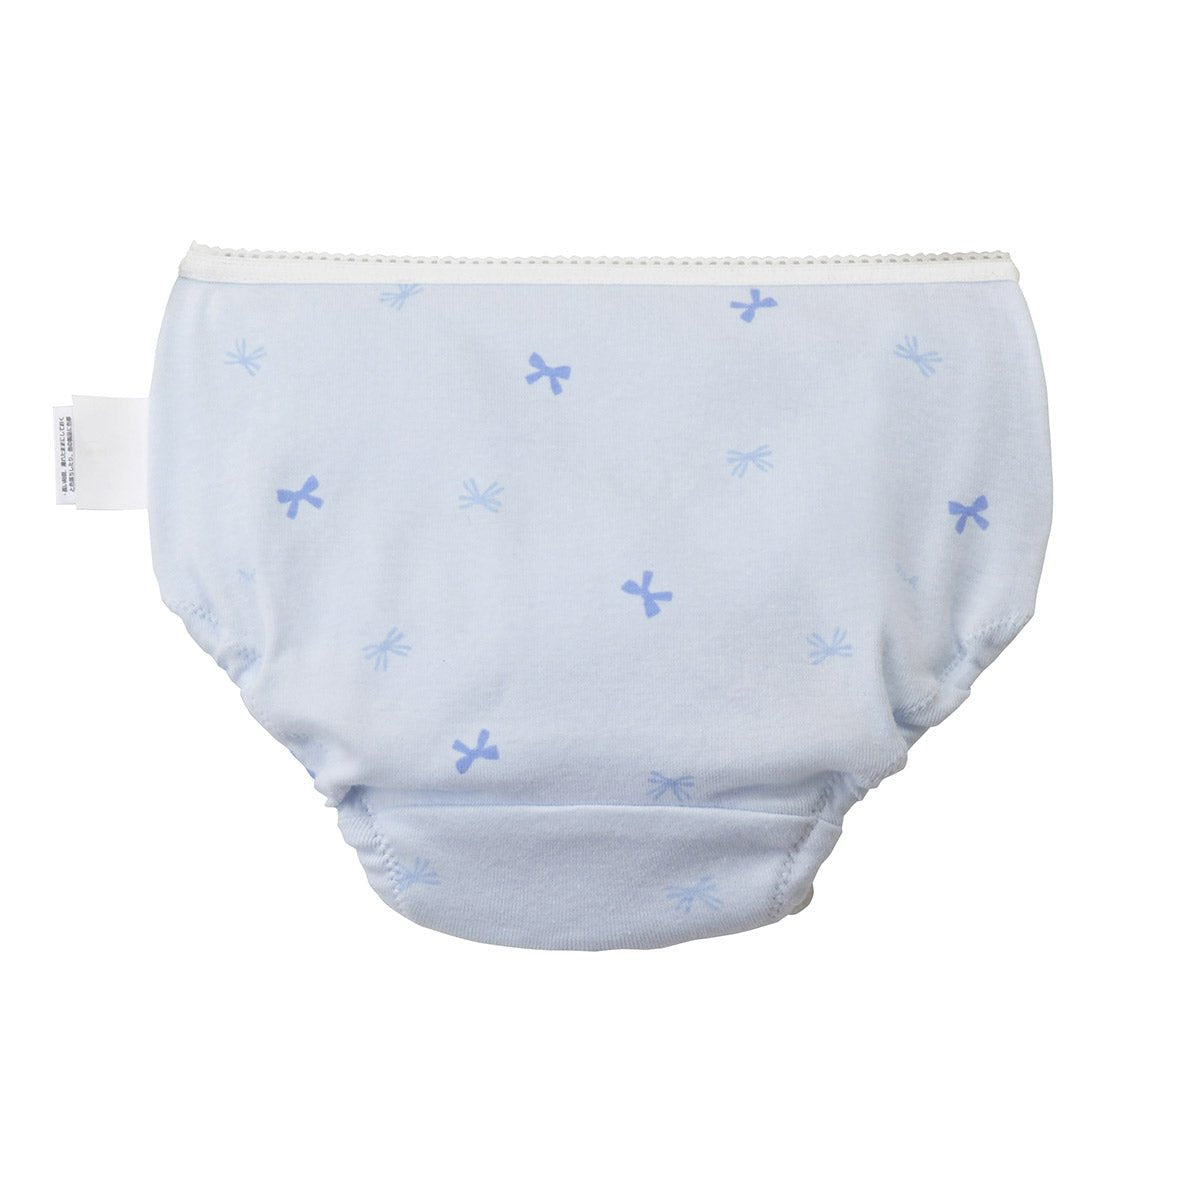 Patterned Underpants - MIKI HOUSE USA